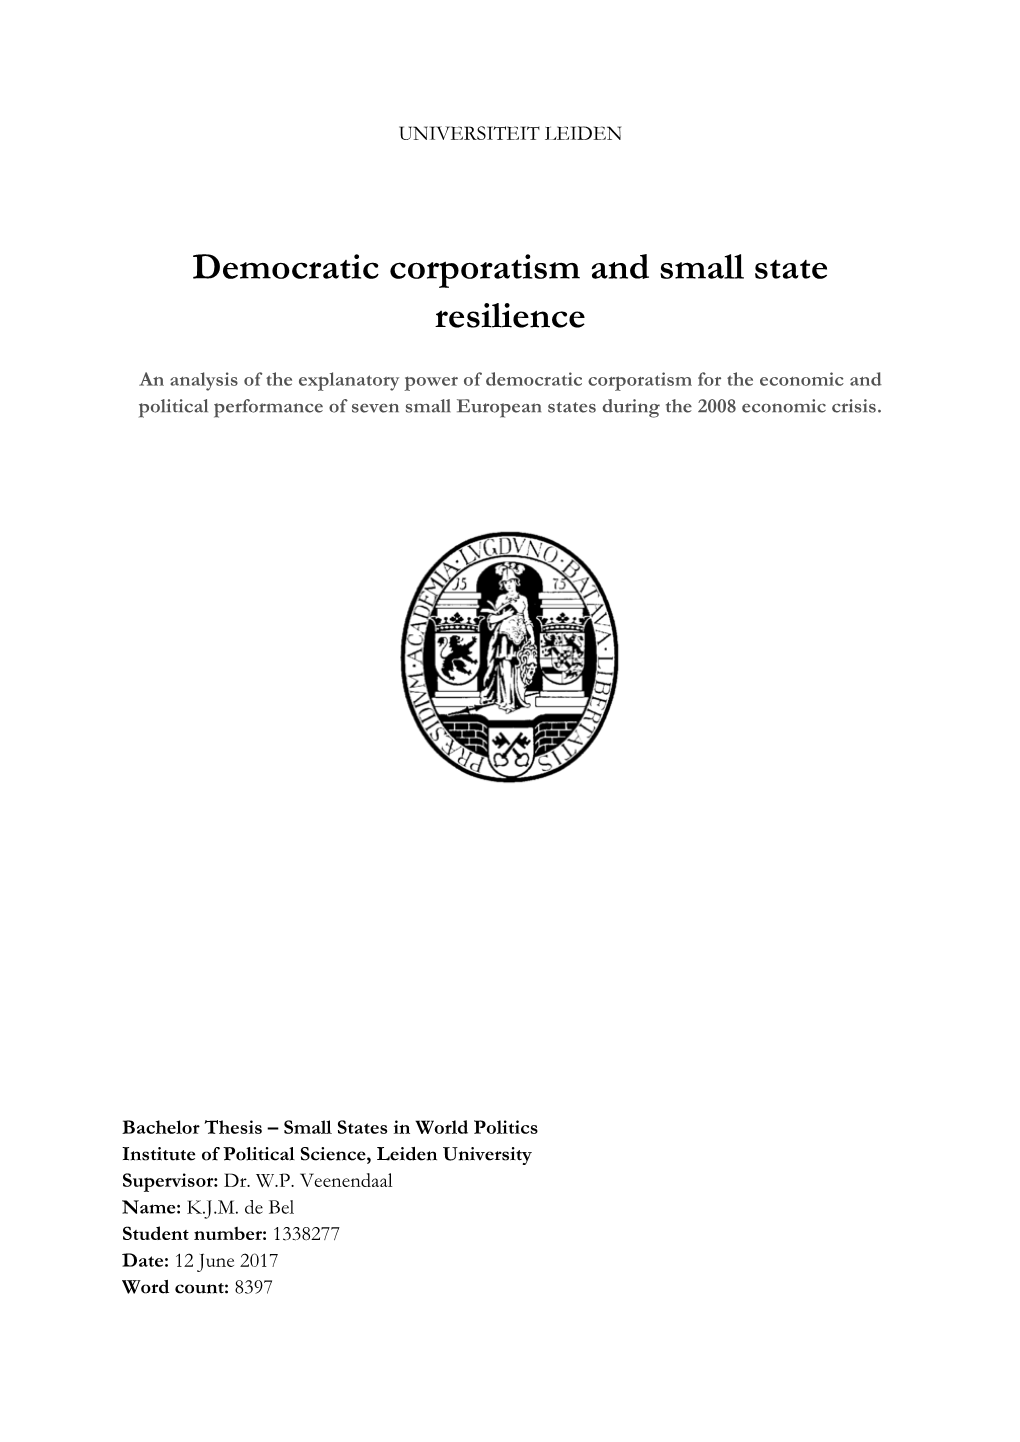 Democratic Corporatism and Small State Resilience